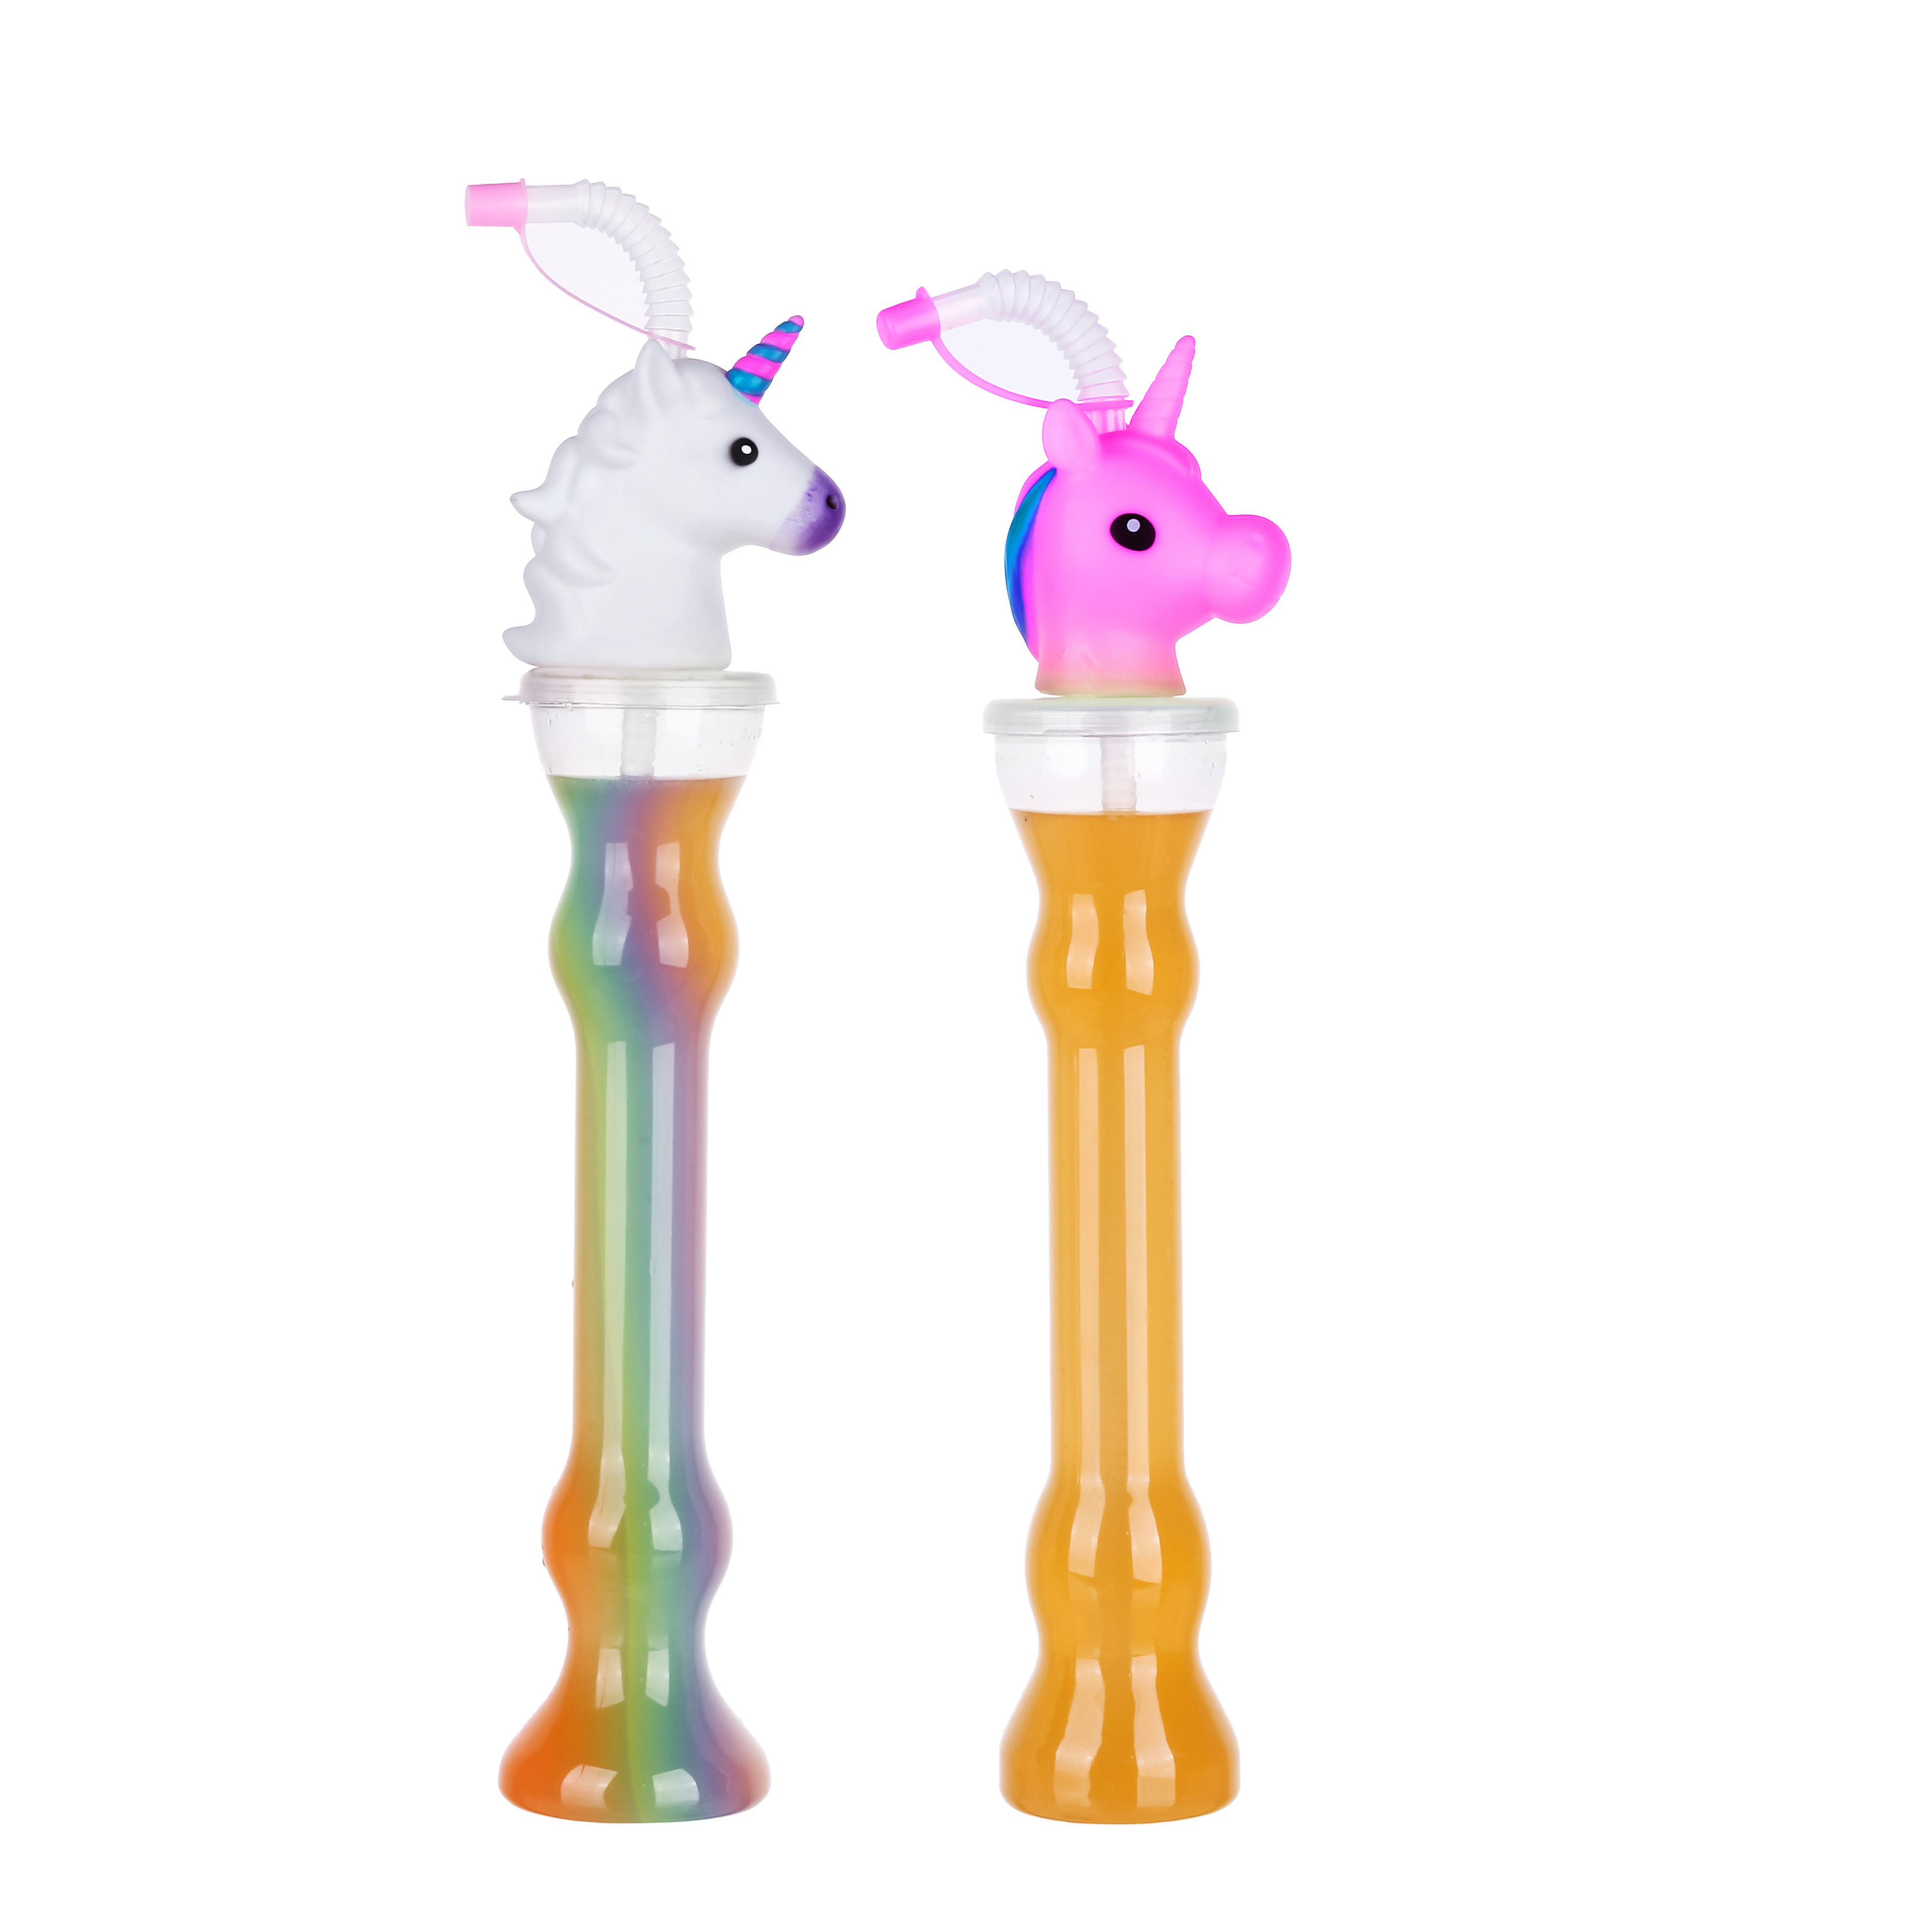 Best Price on Light Up Yard Cup With Straw - 12oz Novelty Unicorn Slush Cup Fun Tall Party Yarder Cup – 12oz / 350ml – Charmlite